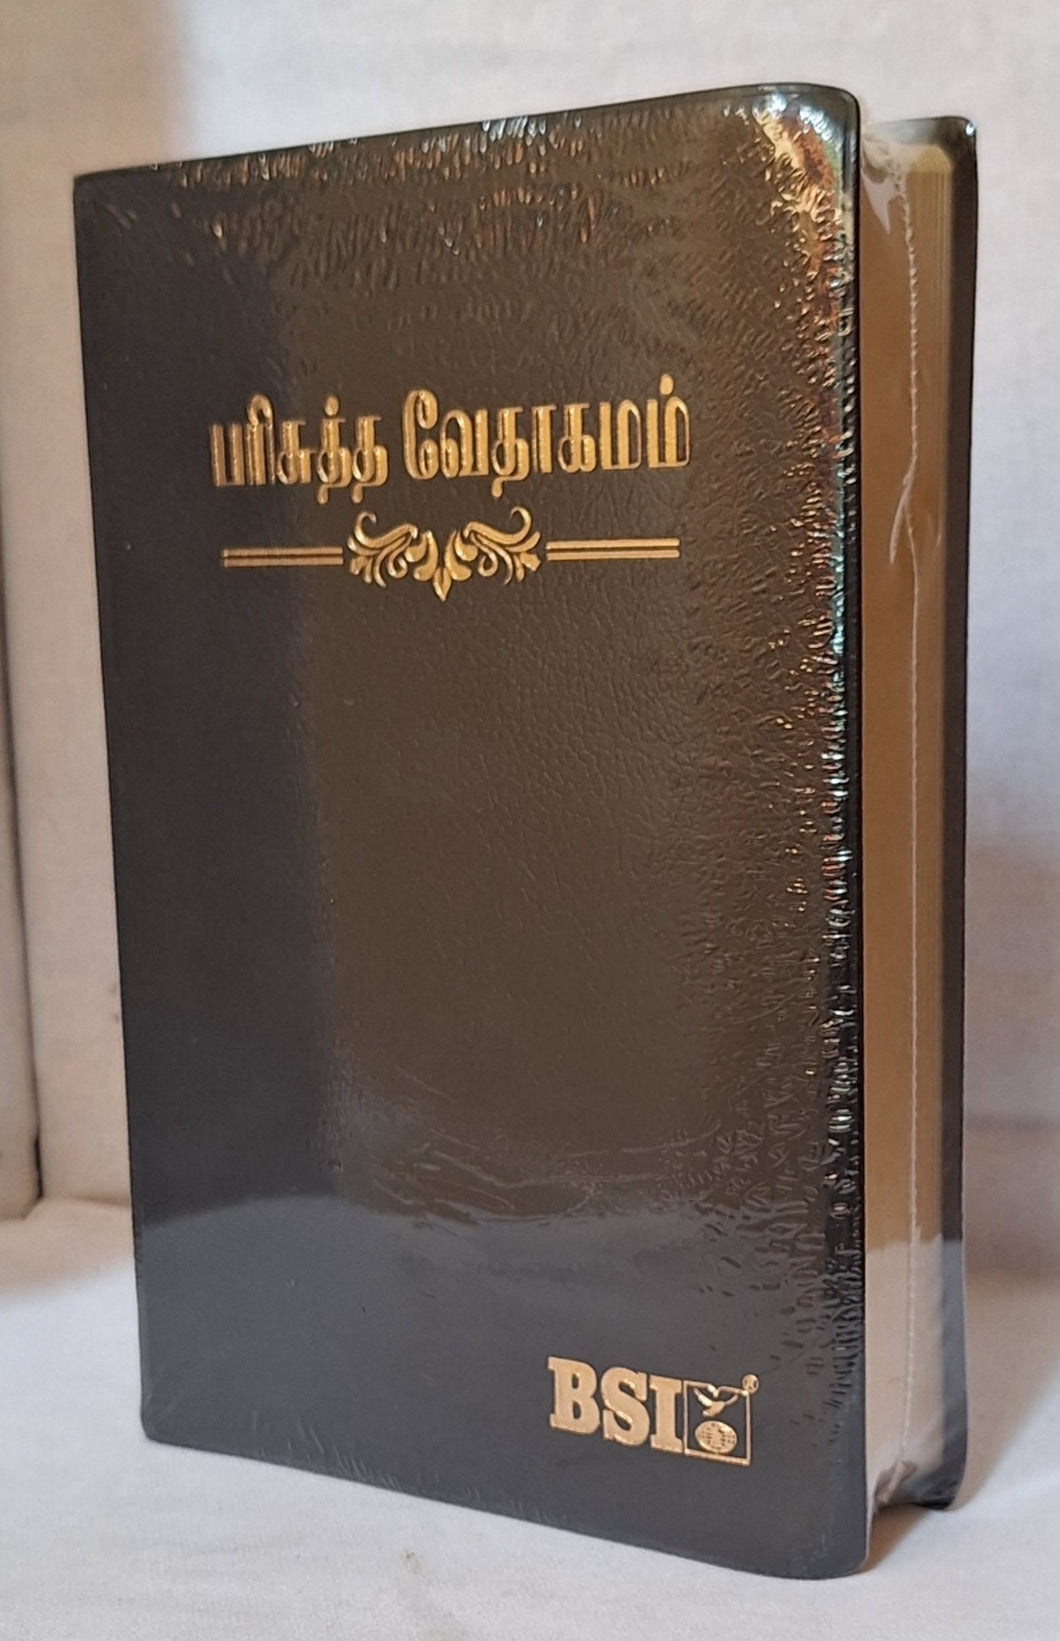 Tamil Holy Bible Personal Size O.V. Crown edition, vinyl. Golden Edge